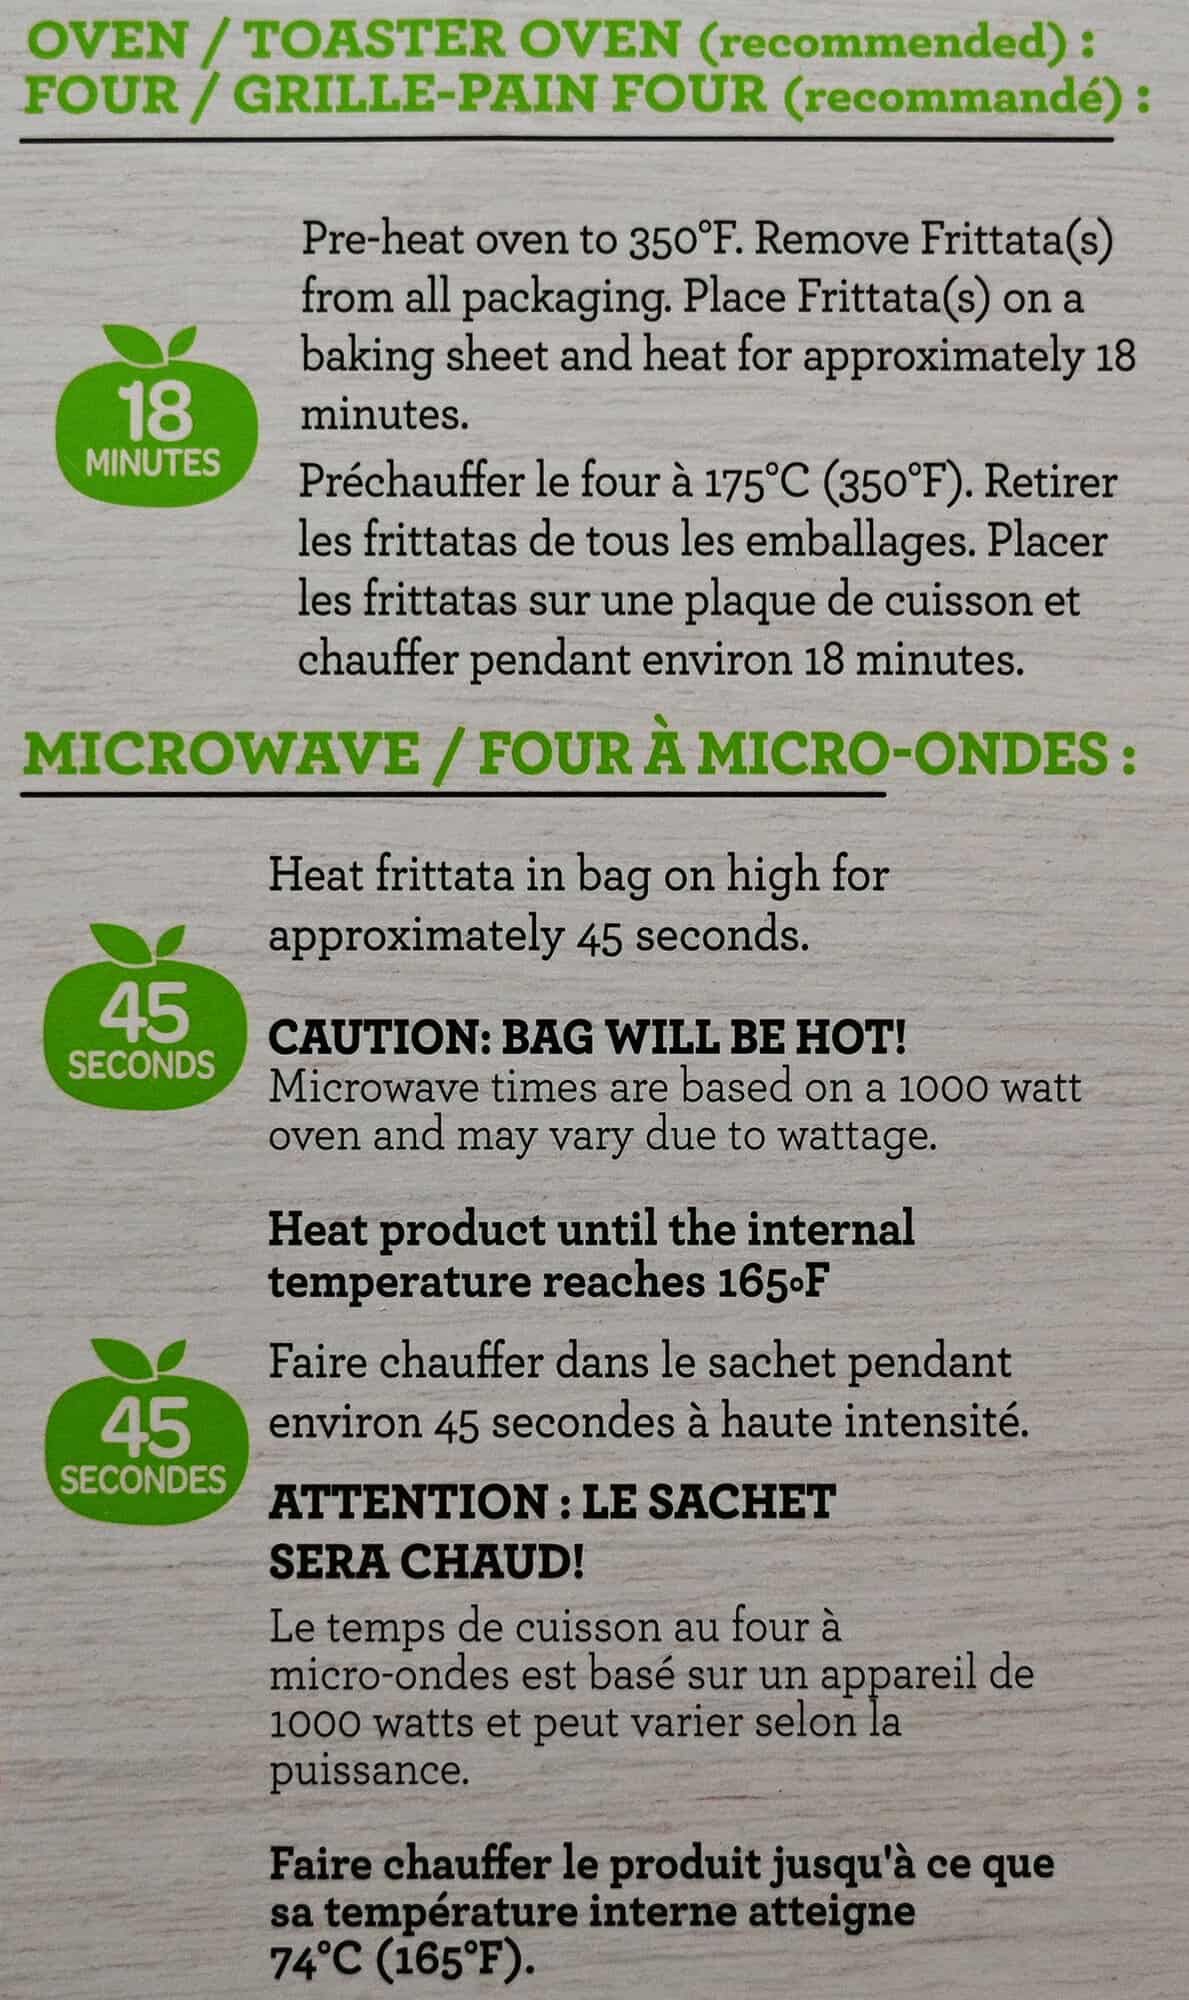 Image of the cooking instructions for the frittata from the back of the box.